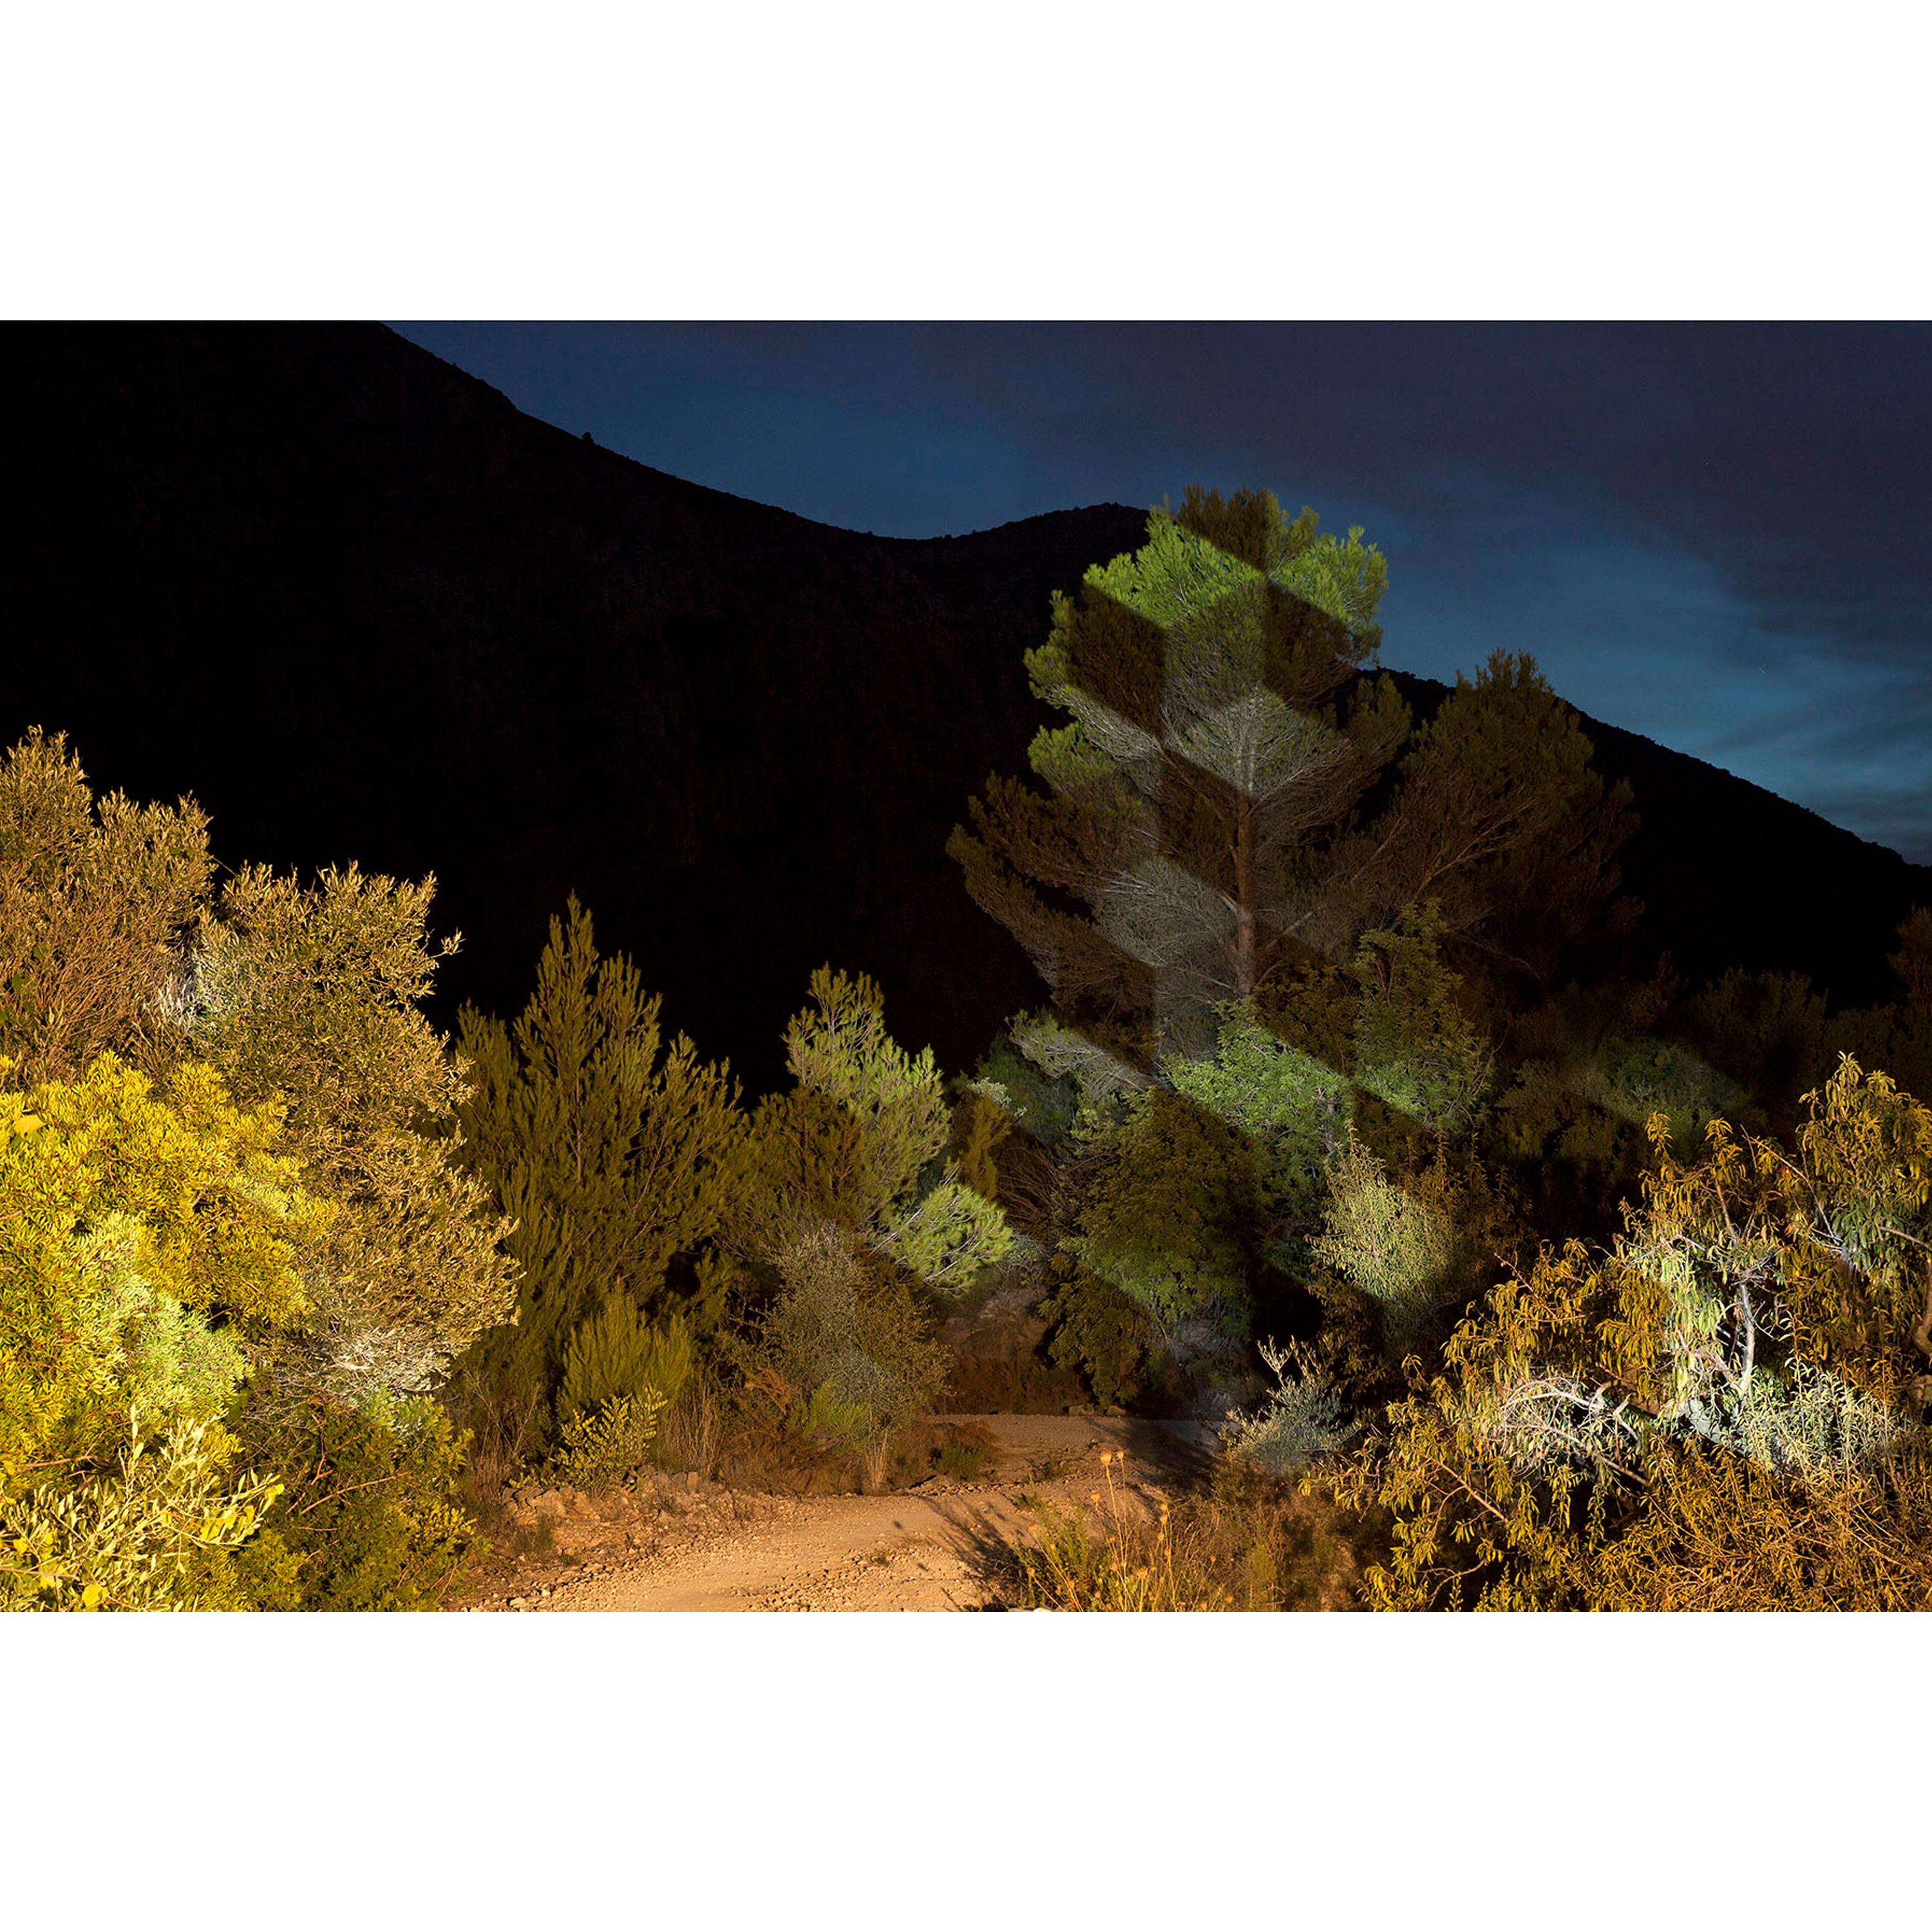 The photograph is part of a series called Landscape Light Interventions. It is framed with white metal and transparent glass.

In Javier Riera's work, geometric shapes of light are projected directly onto vegetation and landscapes. Using